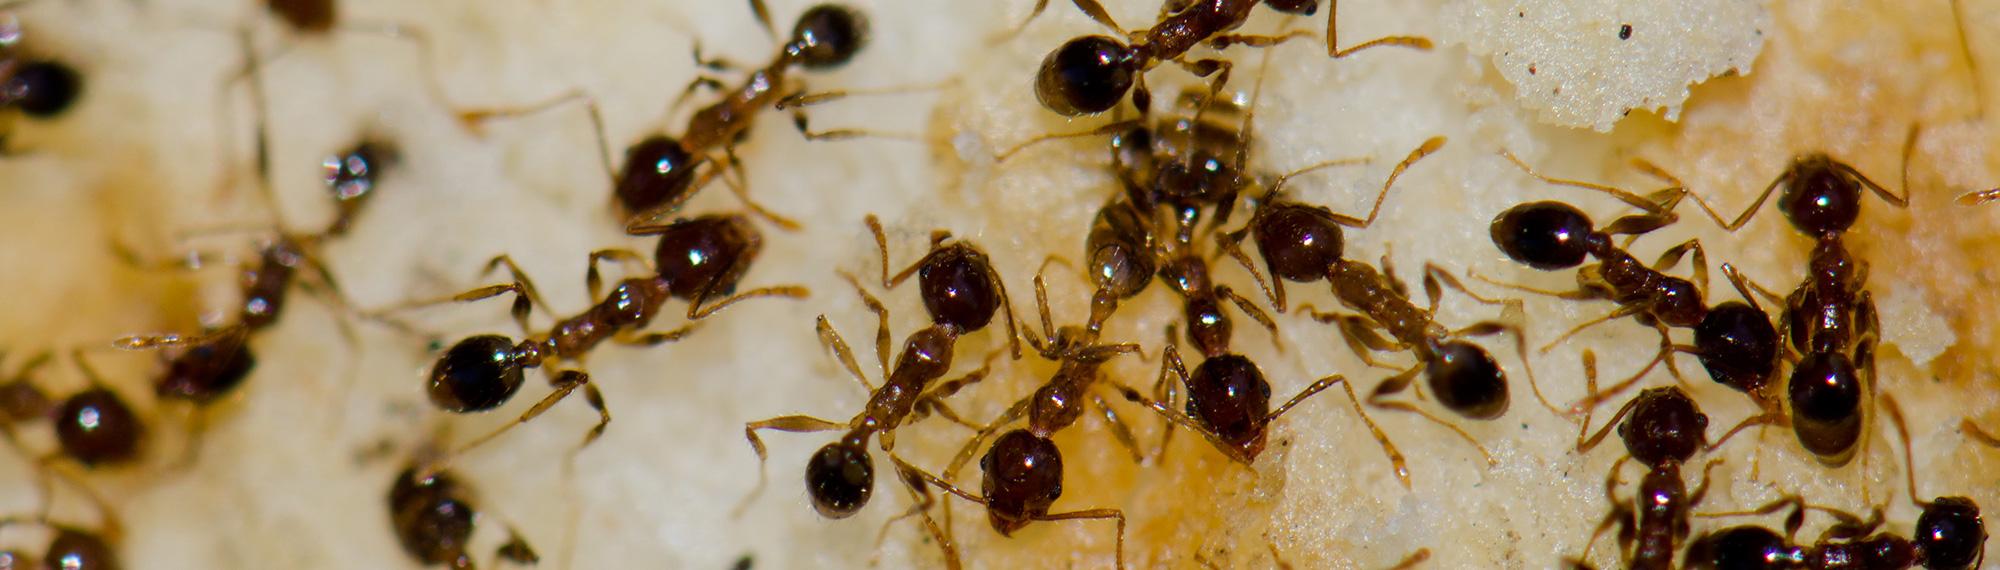 argentine ants foraging for food